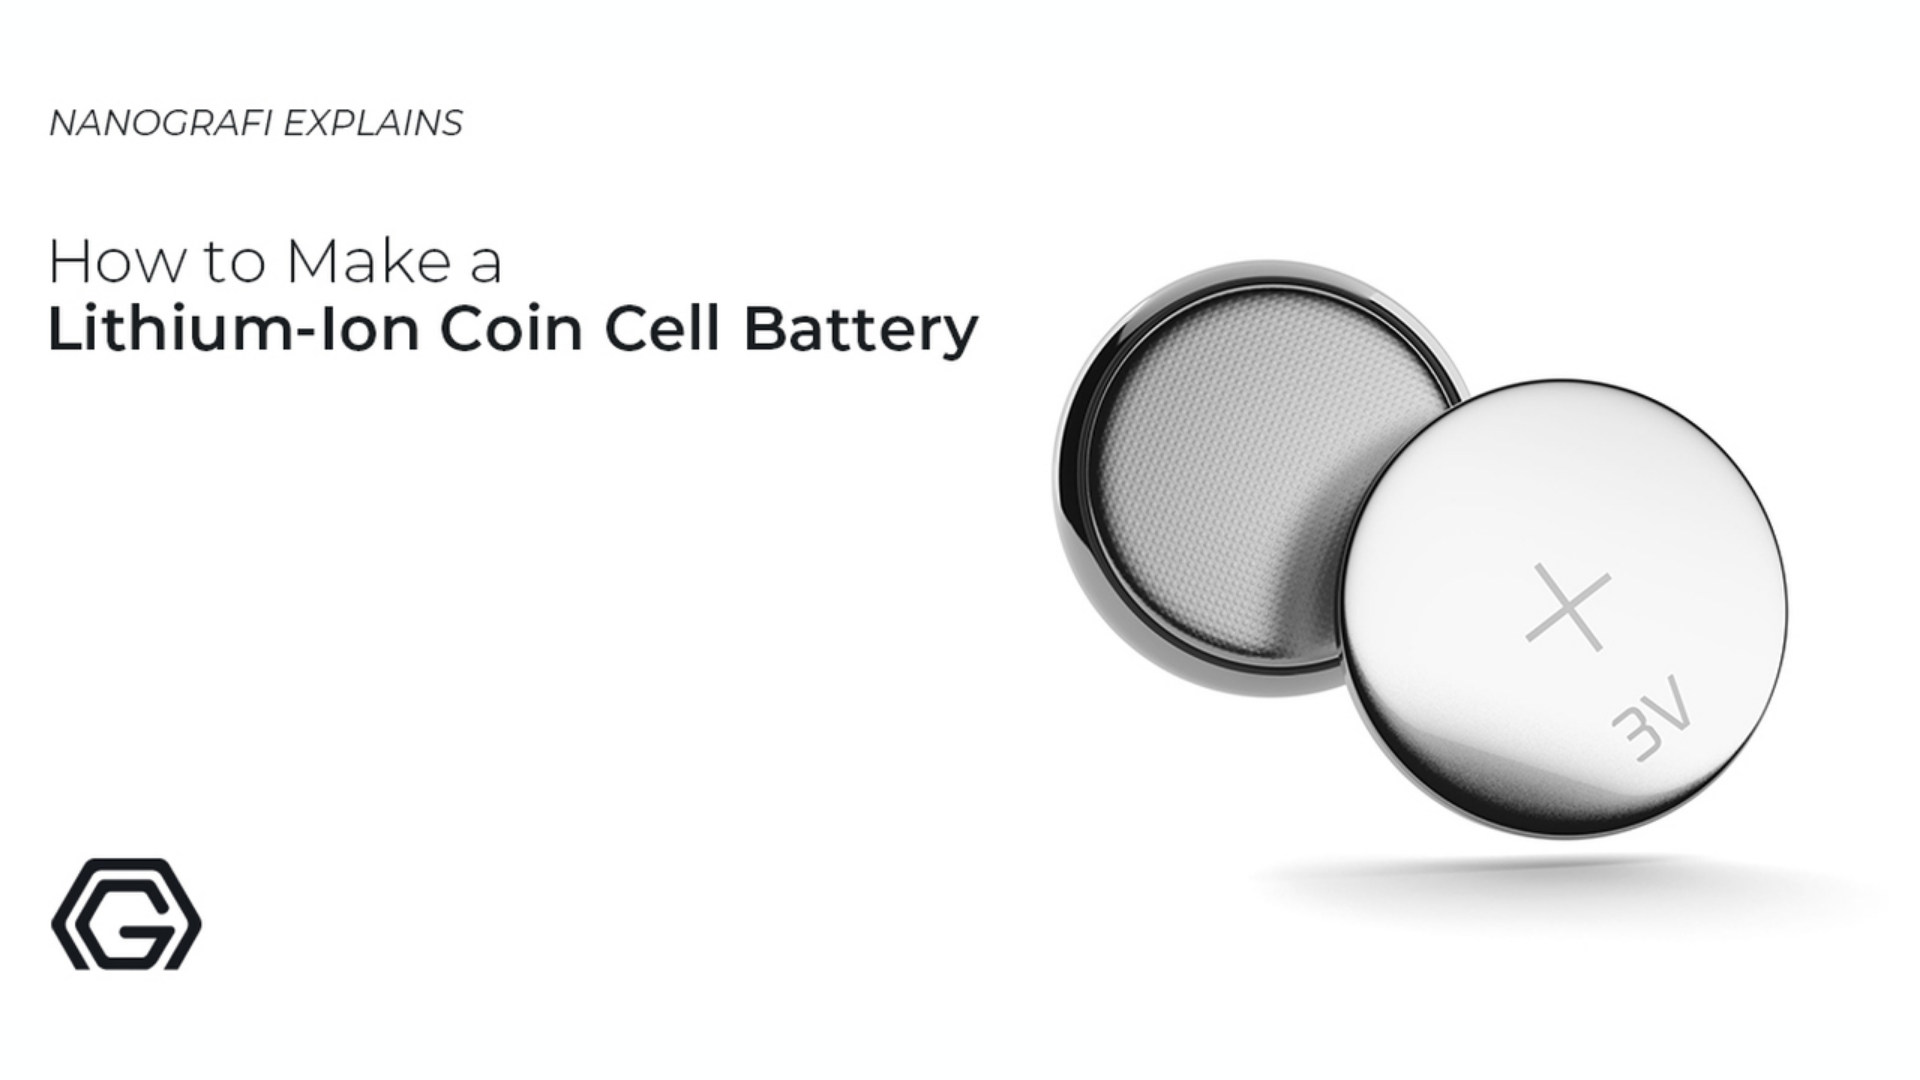 Lithium-Ion Coin Cell Battery